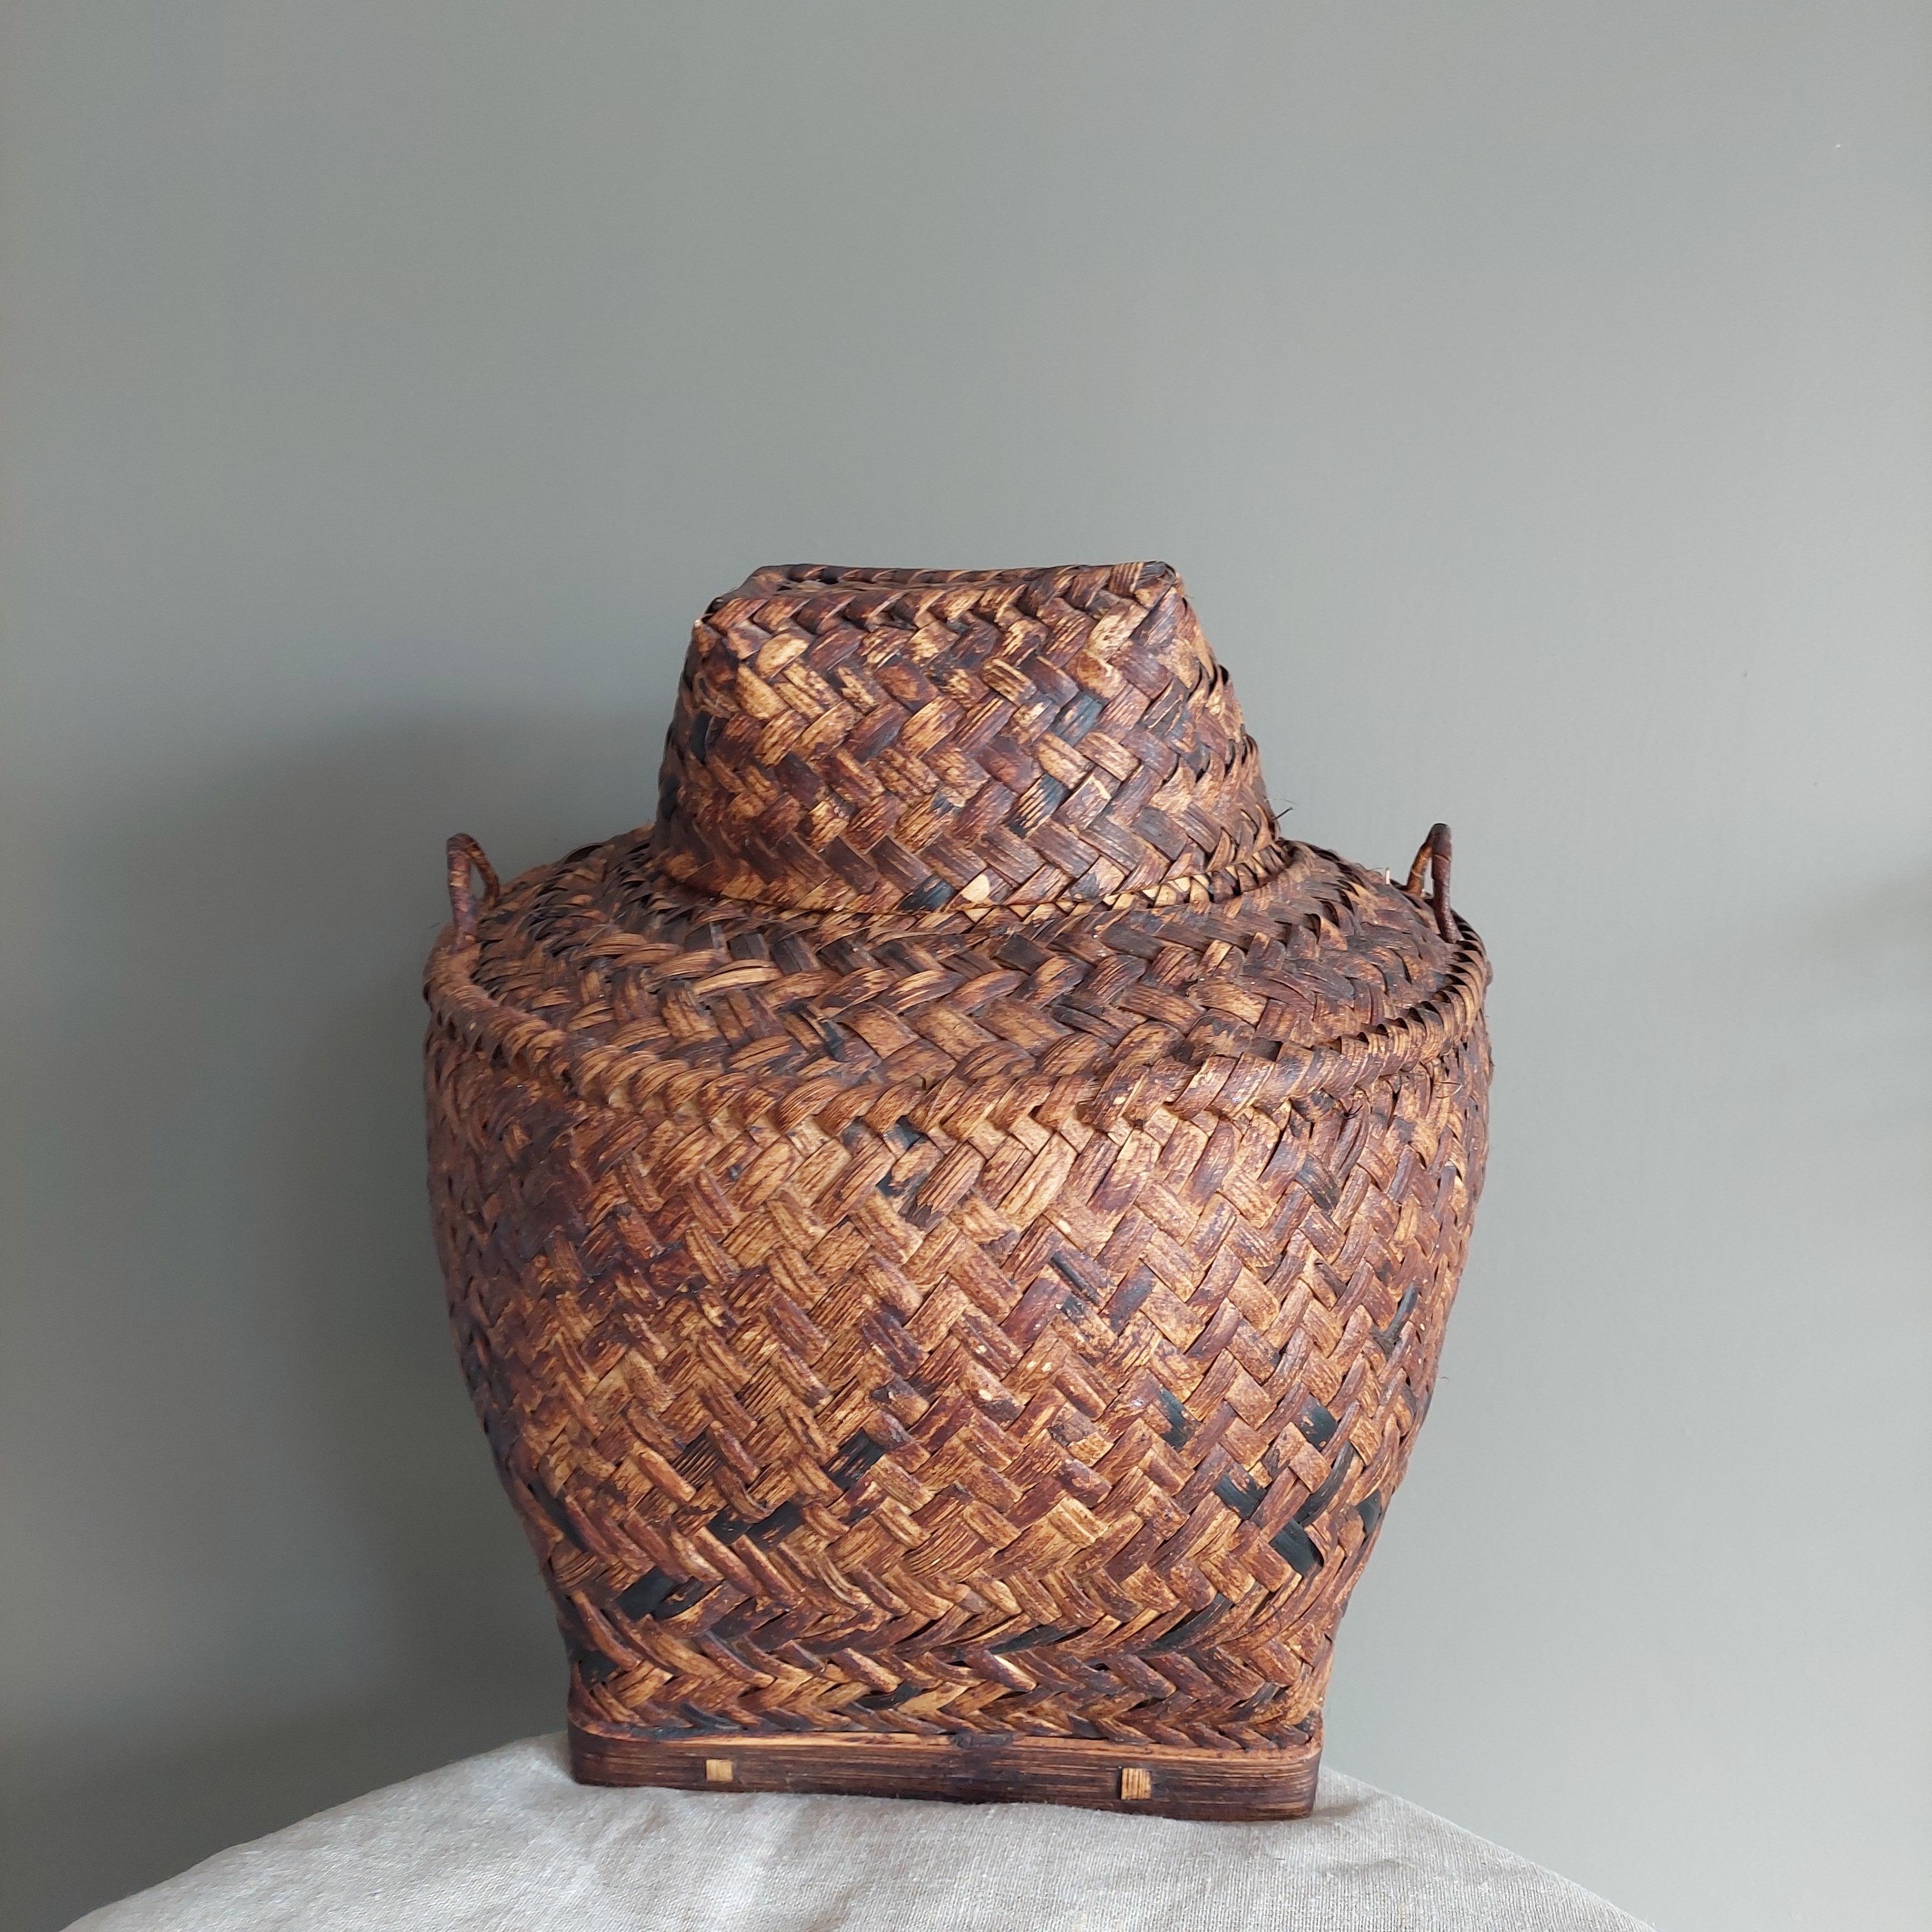 Hand-Crafted Vintage Early 20th Century Asian Woven Rattan Basket With Lid For Sale